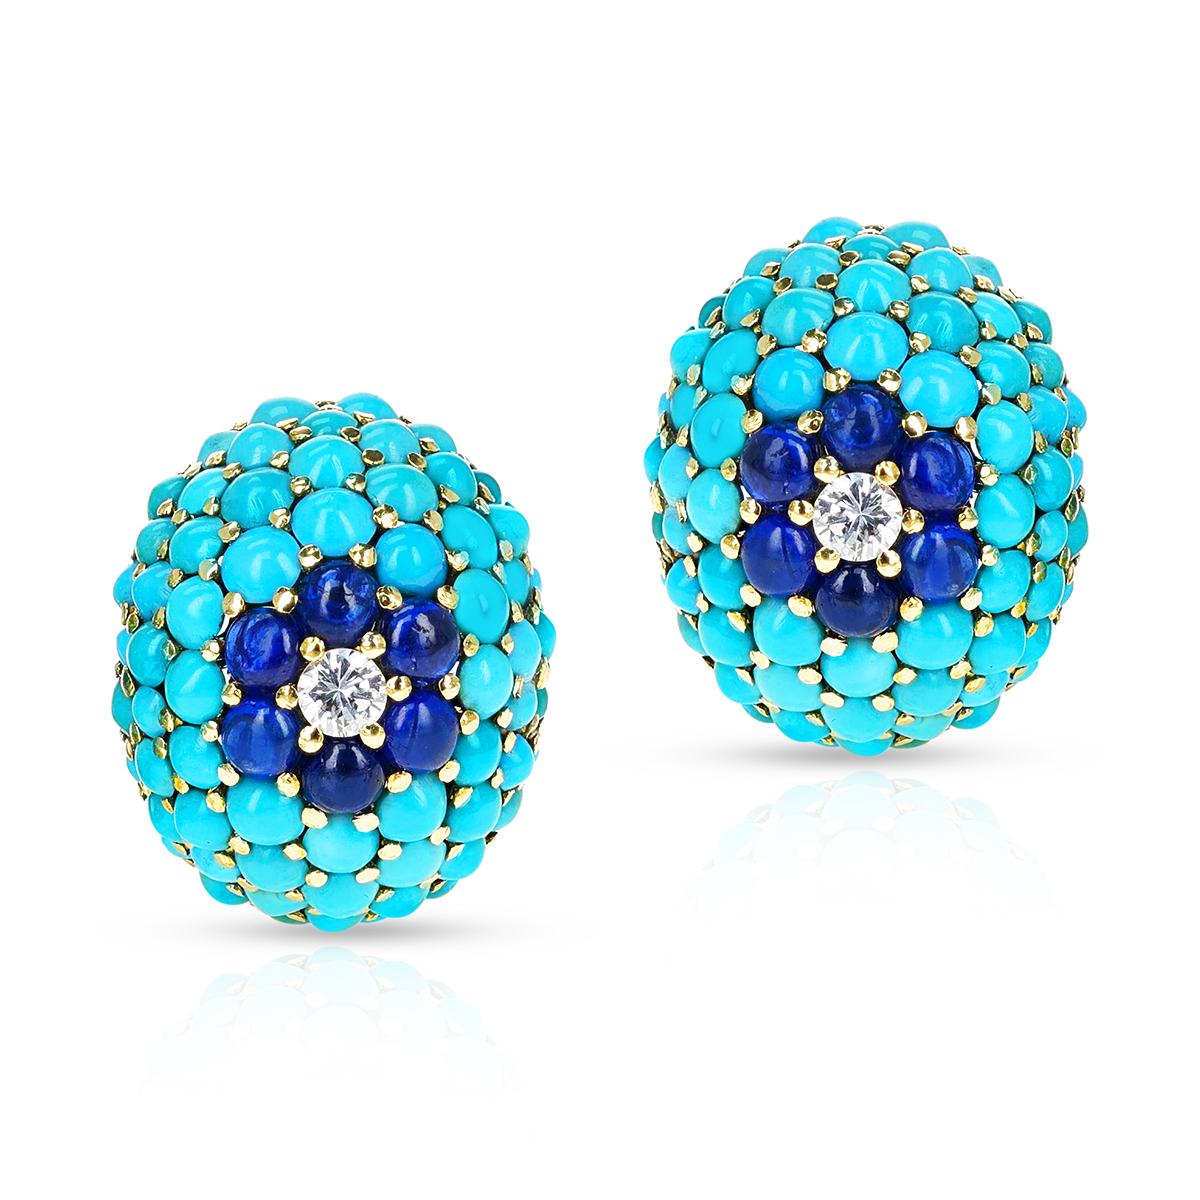 A Retro-Style Turquoise and Sapphire Cabochon pair of Earrings with Diamonds. The sapphires weigh appx. 3.60 cts. and the diamonds weigh 0.40 cts. The ring is made in 18k Yellow Gold. Matching Ring available.


